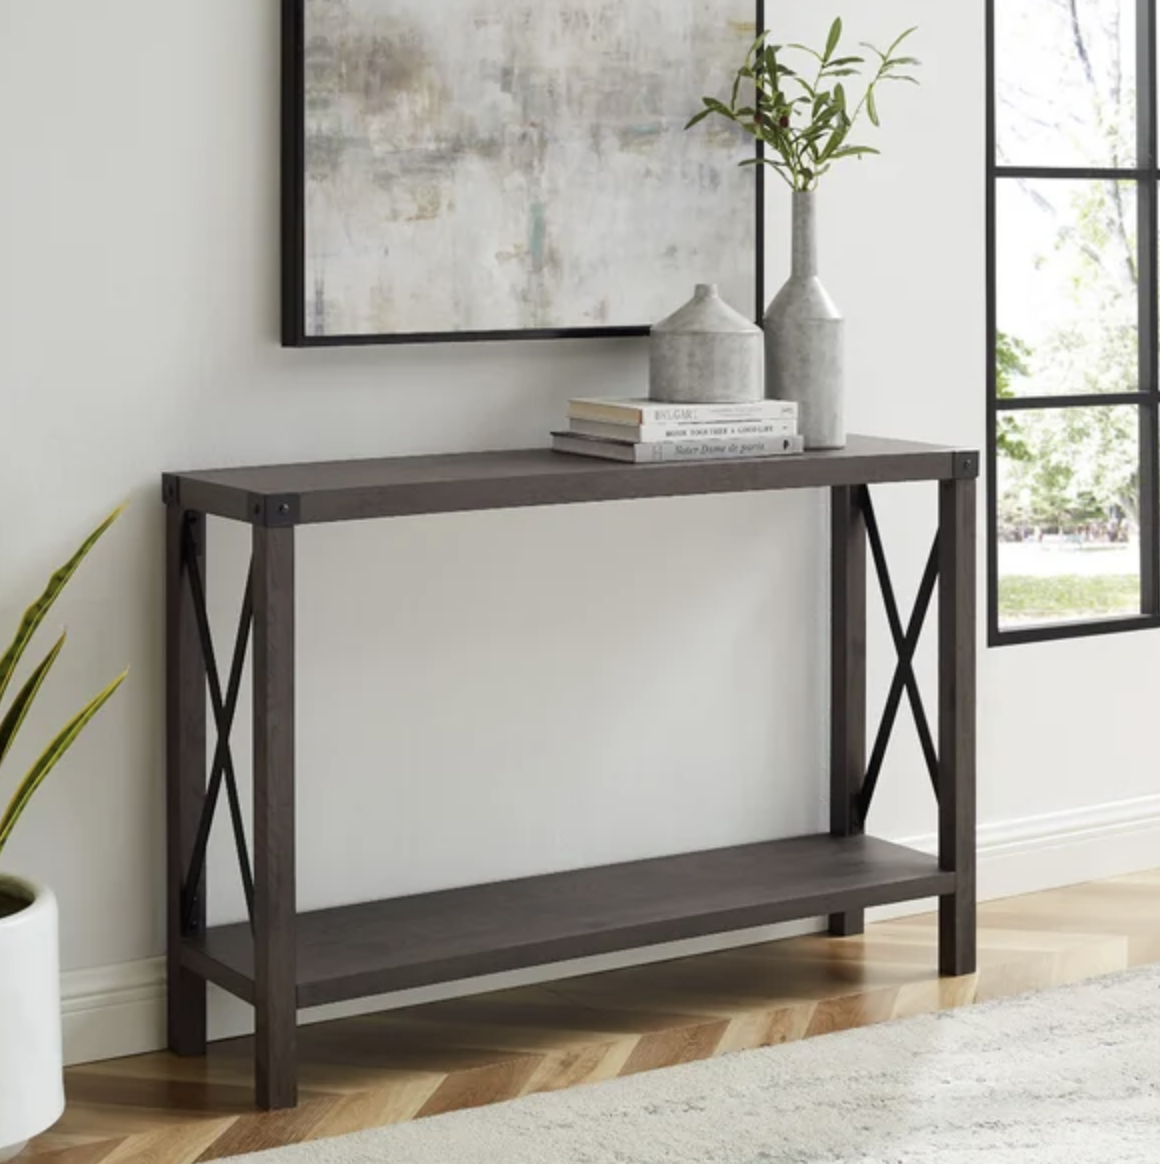 The console table in a room with a plant on top of it